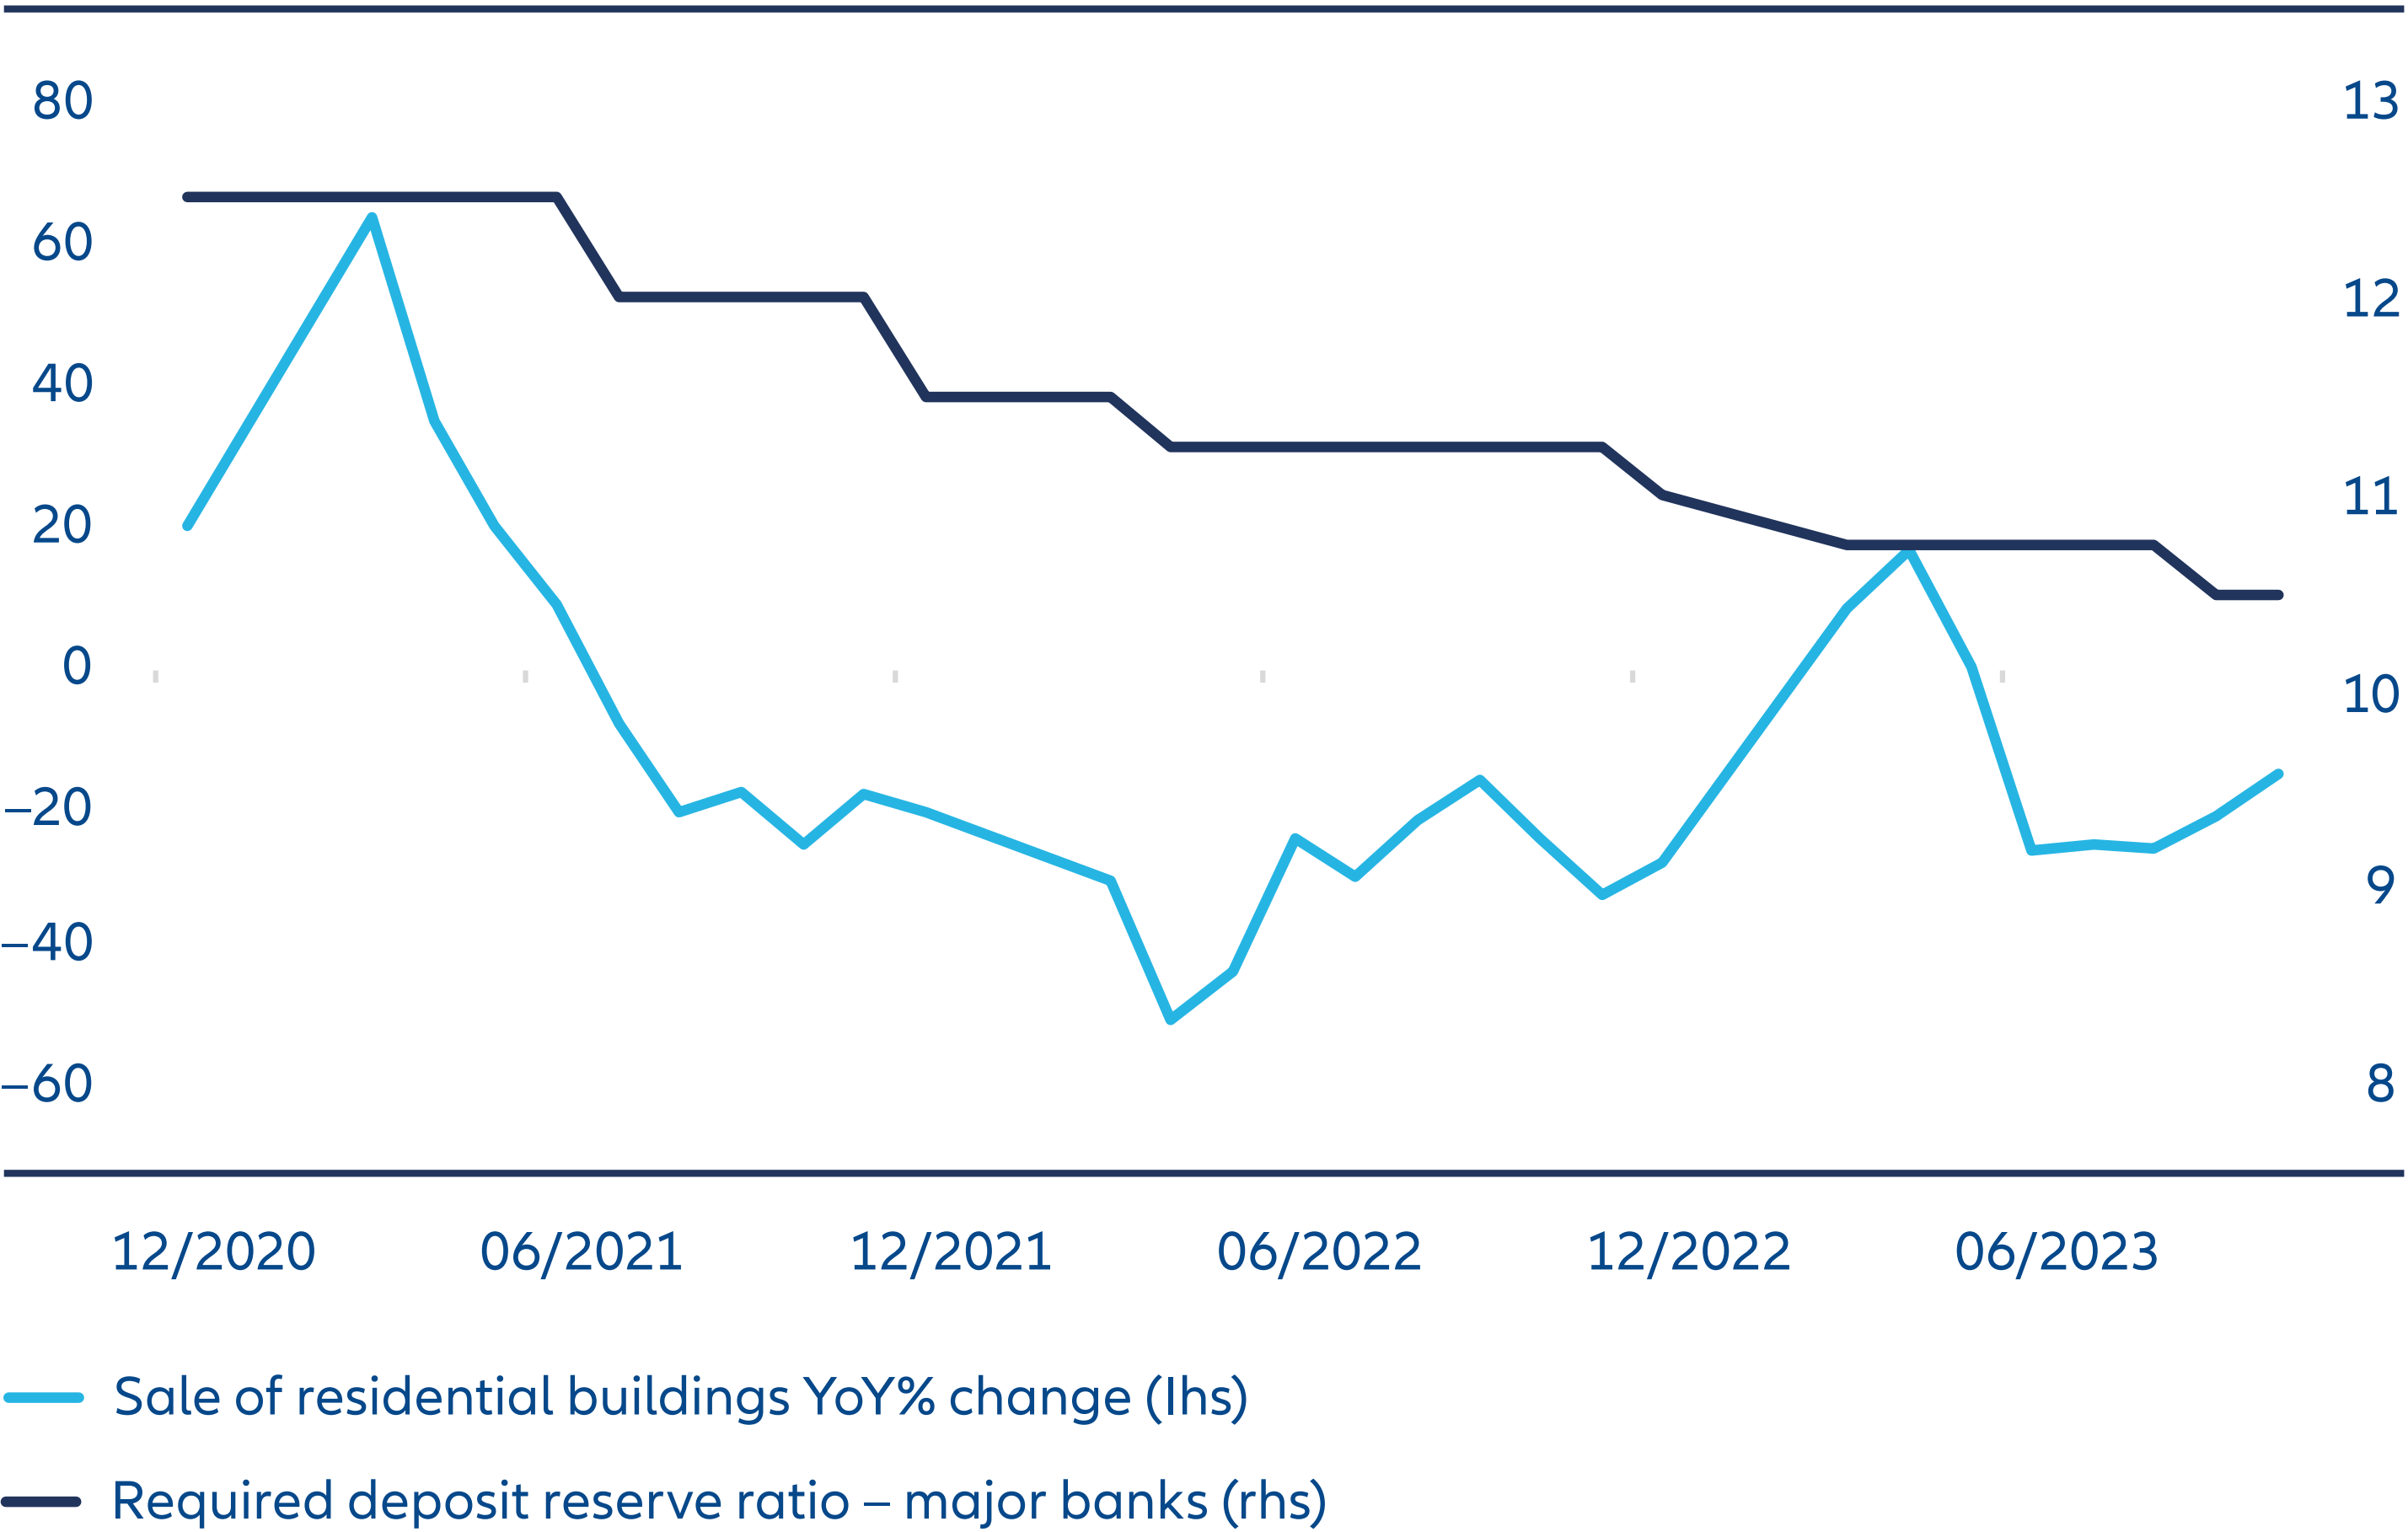 Exhibit 3: China residential property sales, required banking reserve ratio